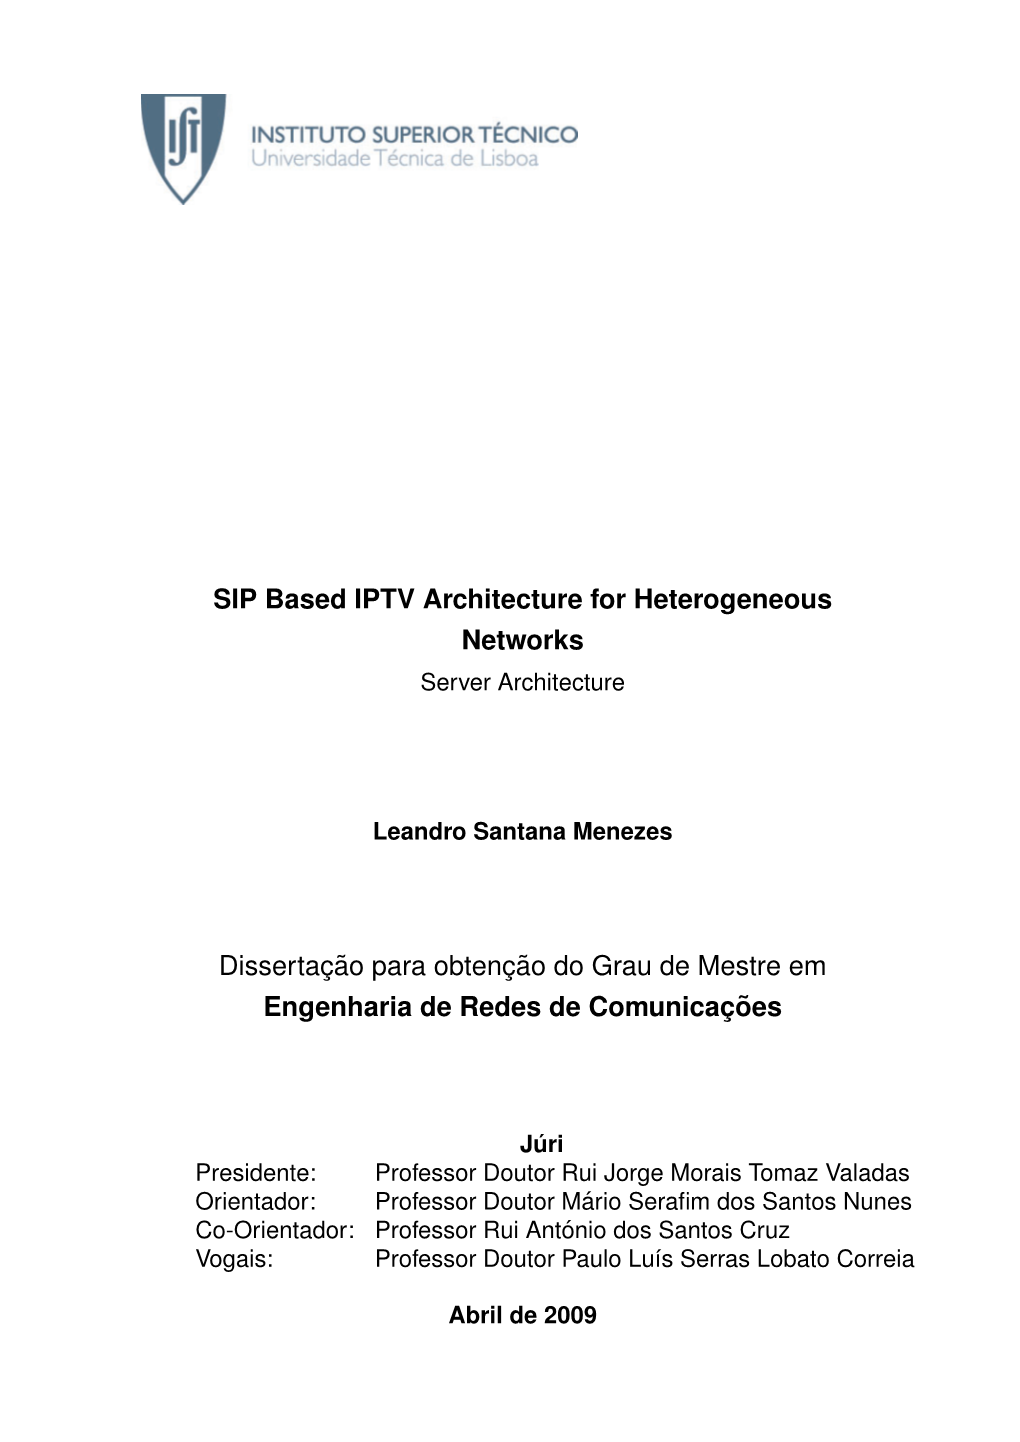 SIP Based IPTV Architecture for Heterogeneous Networks Server Architecture